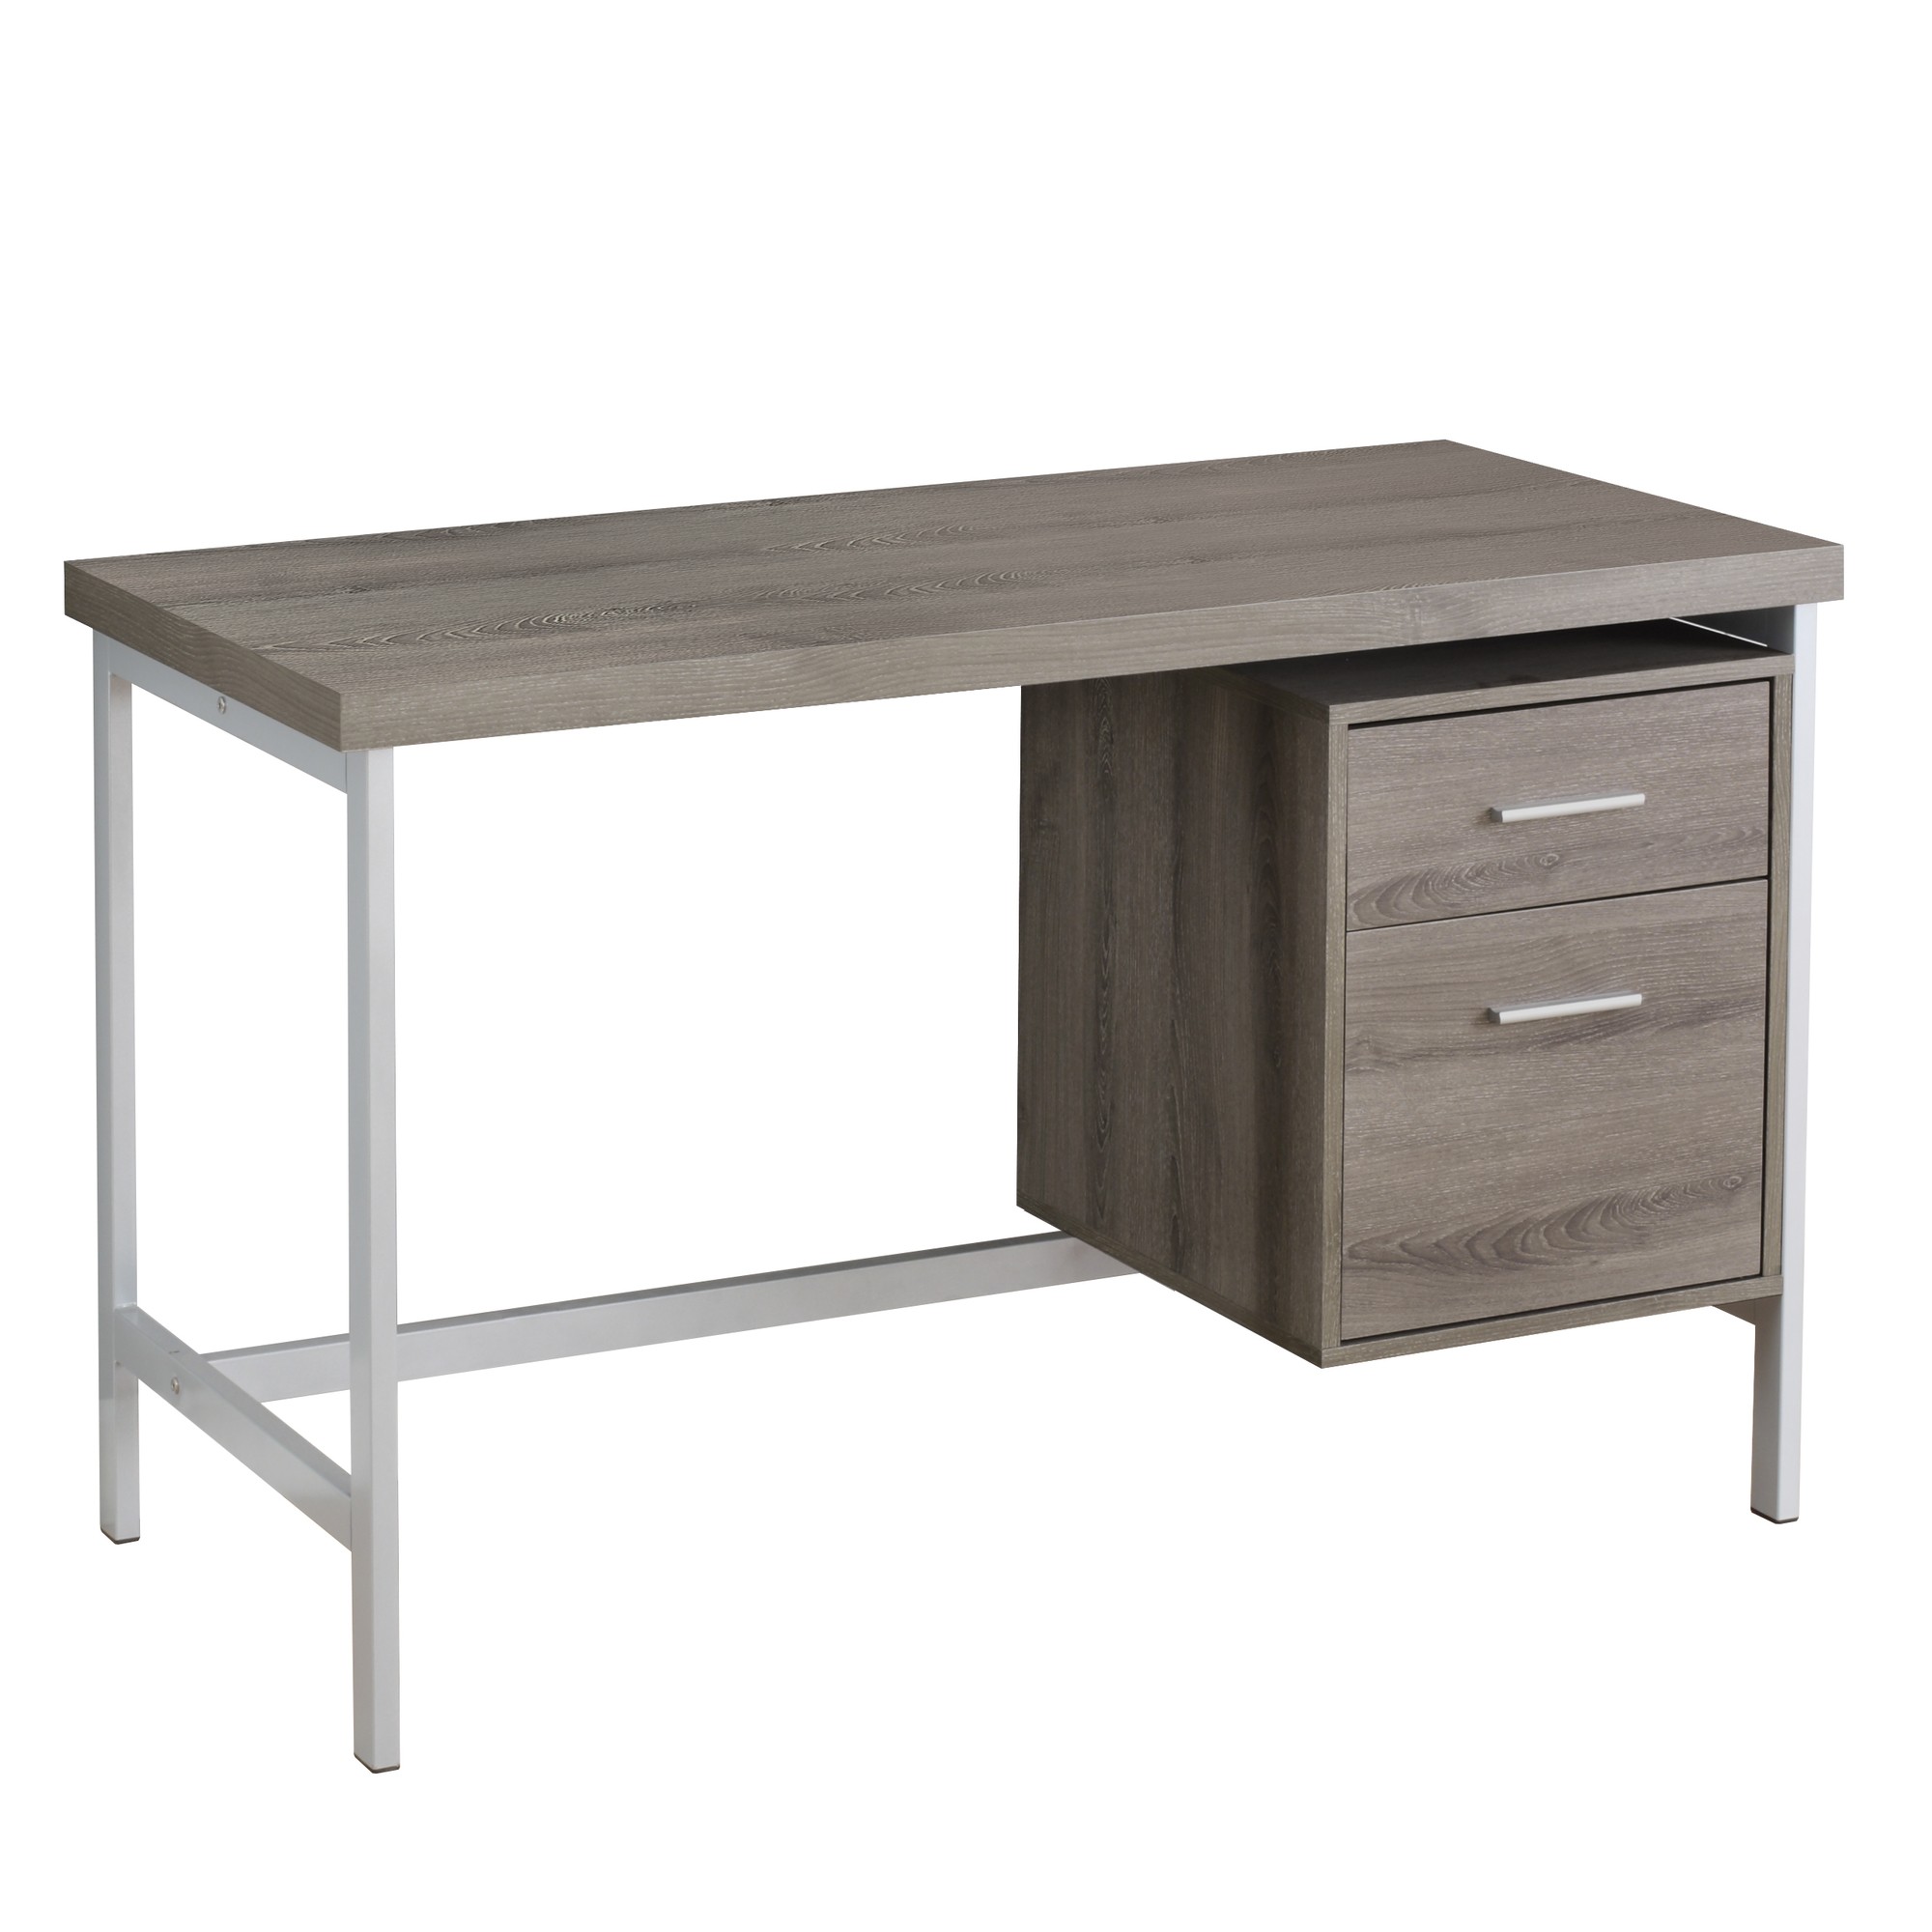 48" Computer Desk with Storage Drawers, Chrome Metal and Dark Taupe 